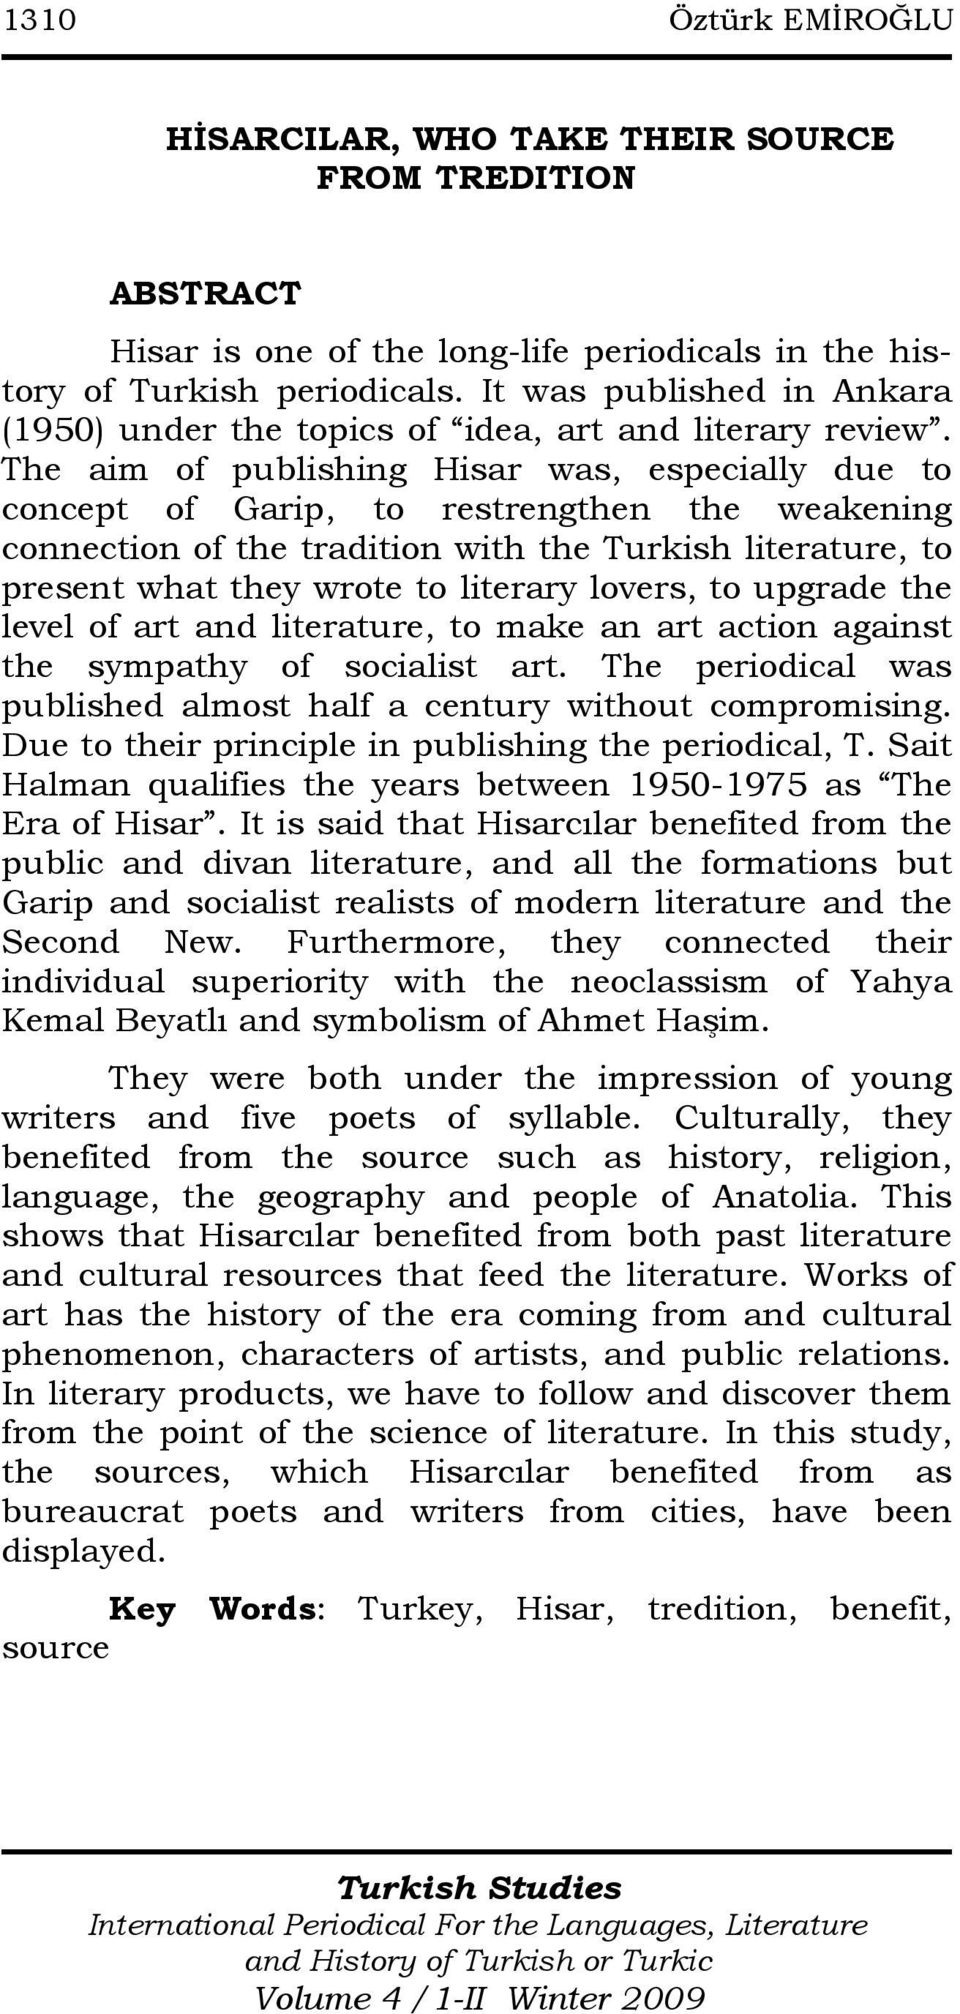 The aim of publishing Hisar was, especially due to concept of Garip, to restrengthen the weakening connection of the tradition with the Turkish literature, to present what they wrote to literary